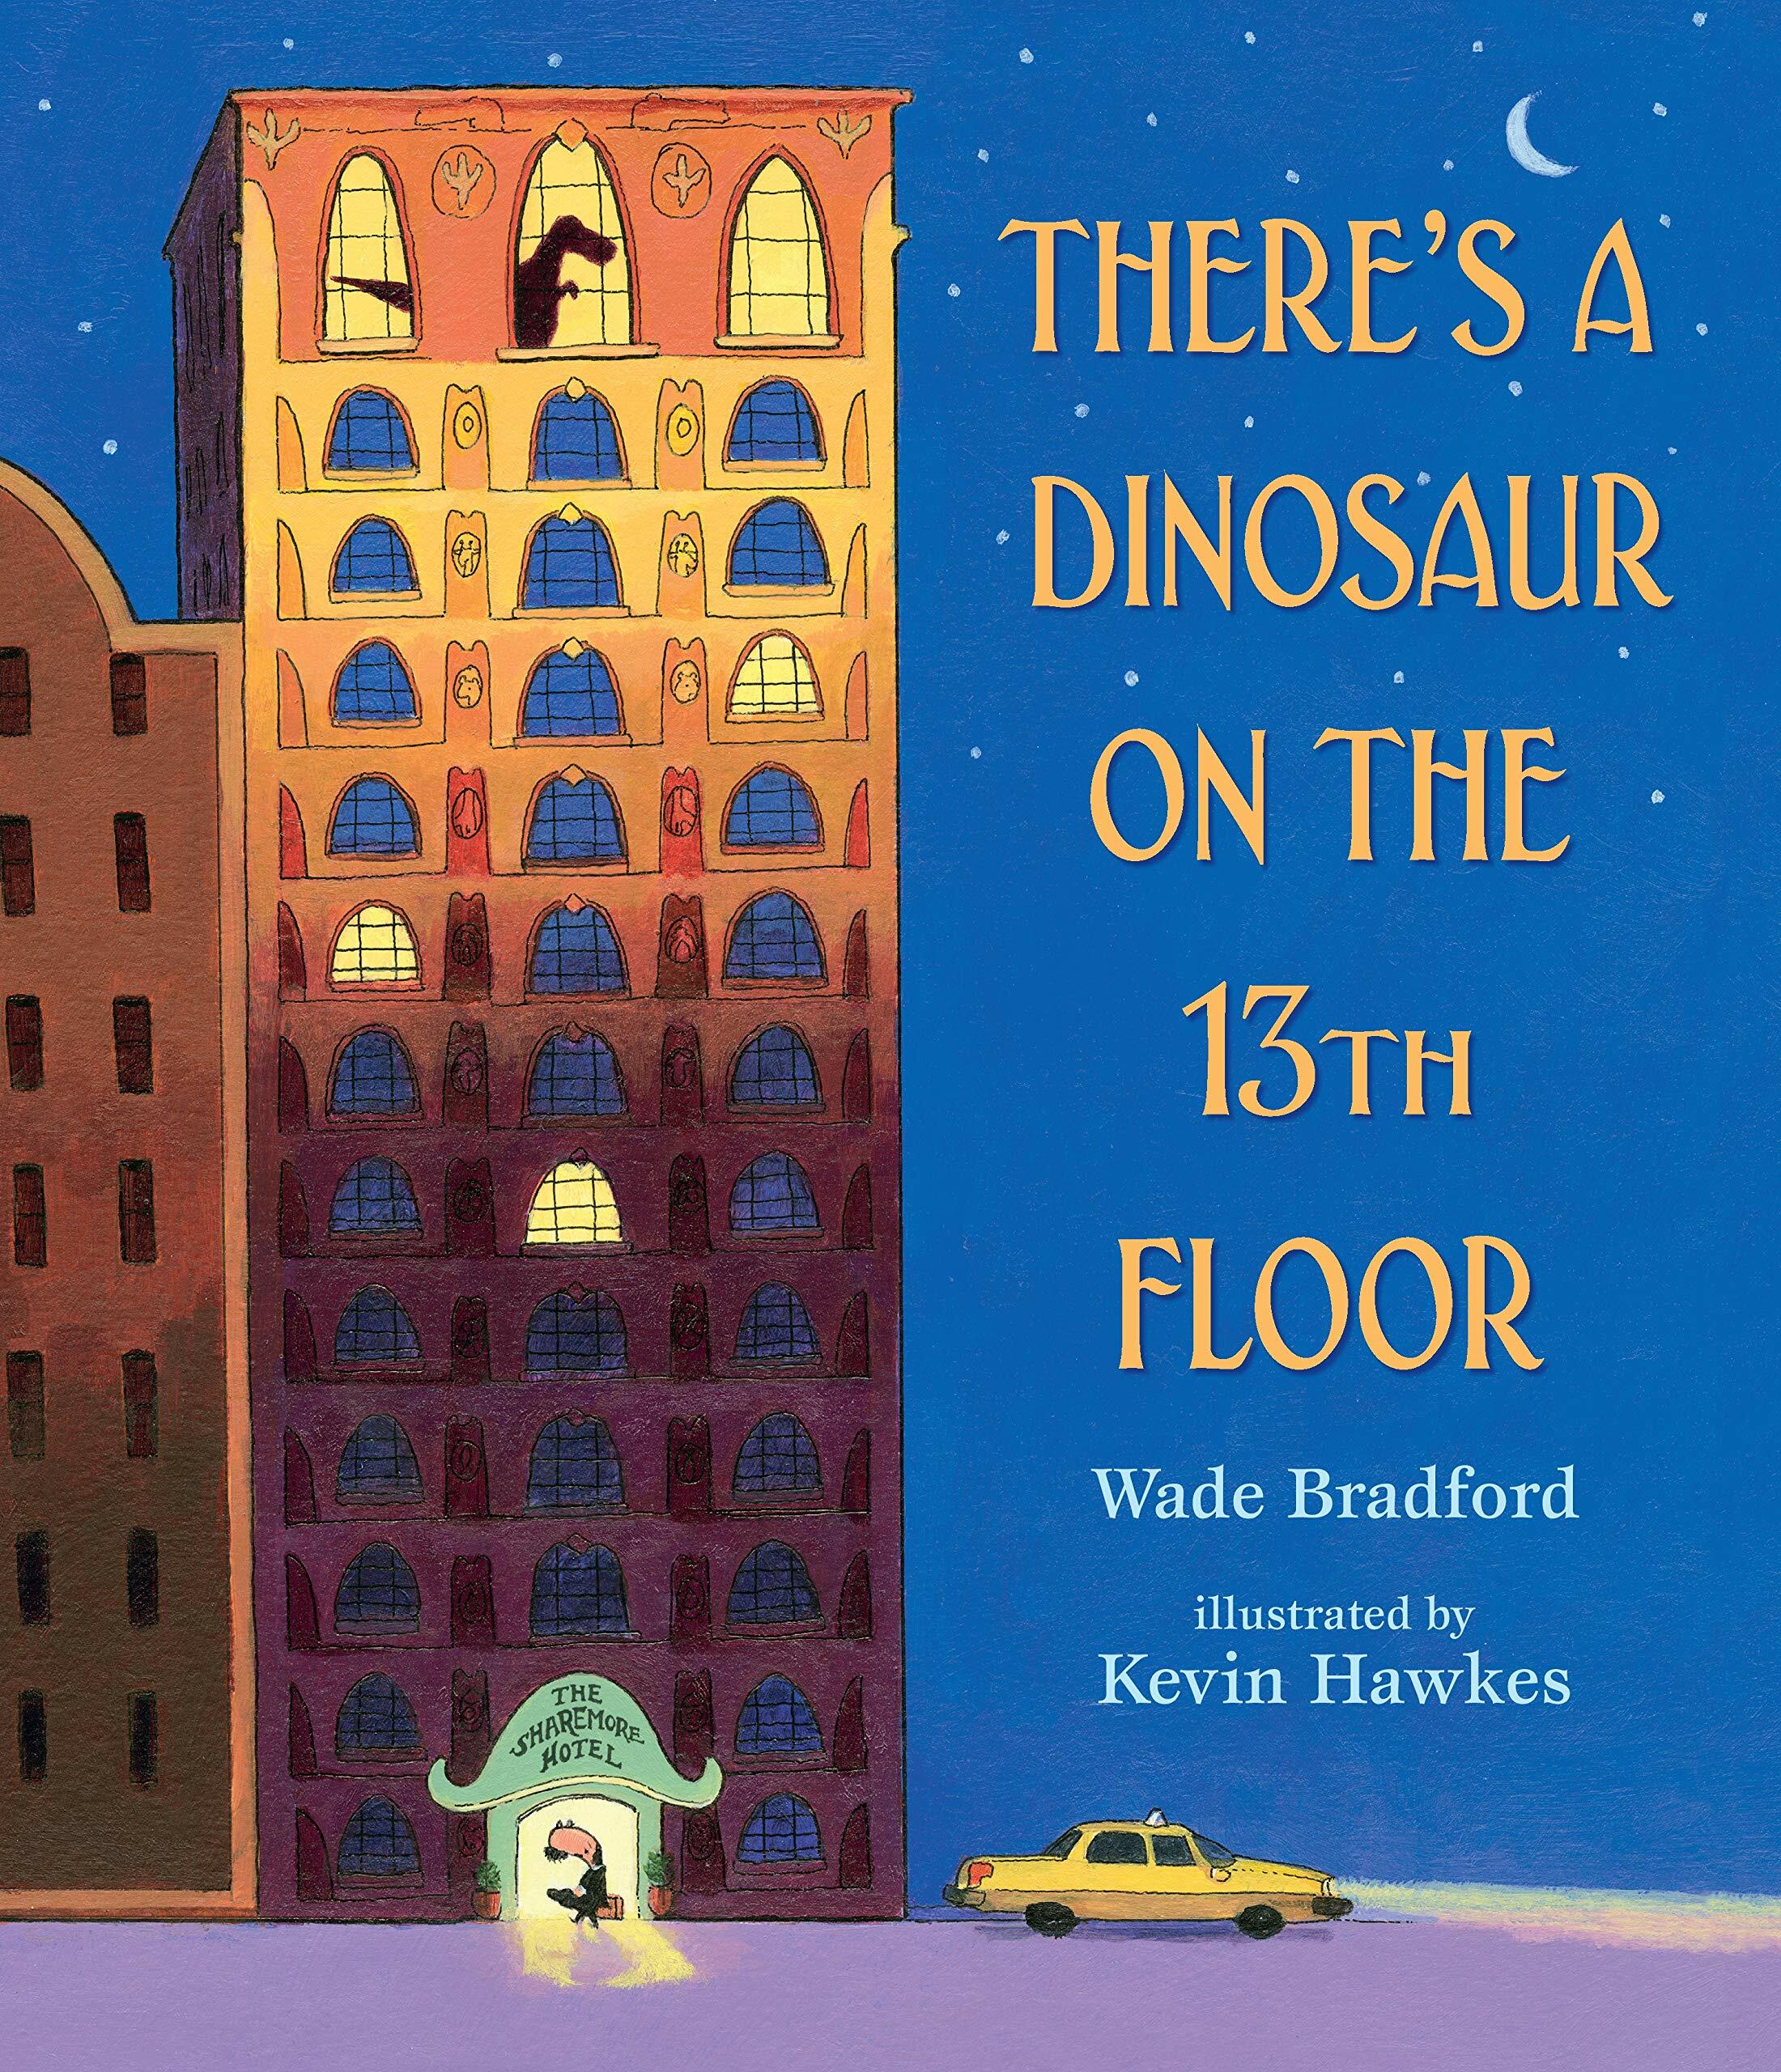 Theres a Dinosaur on the 13th Floor (Hardcover)